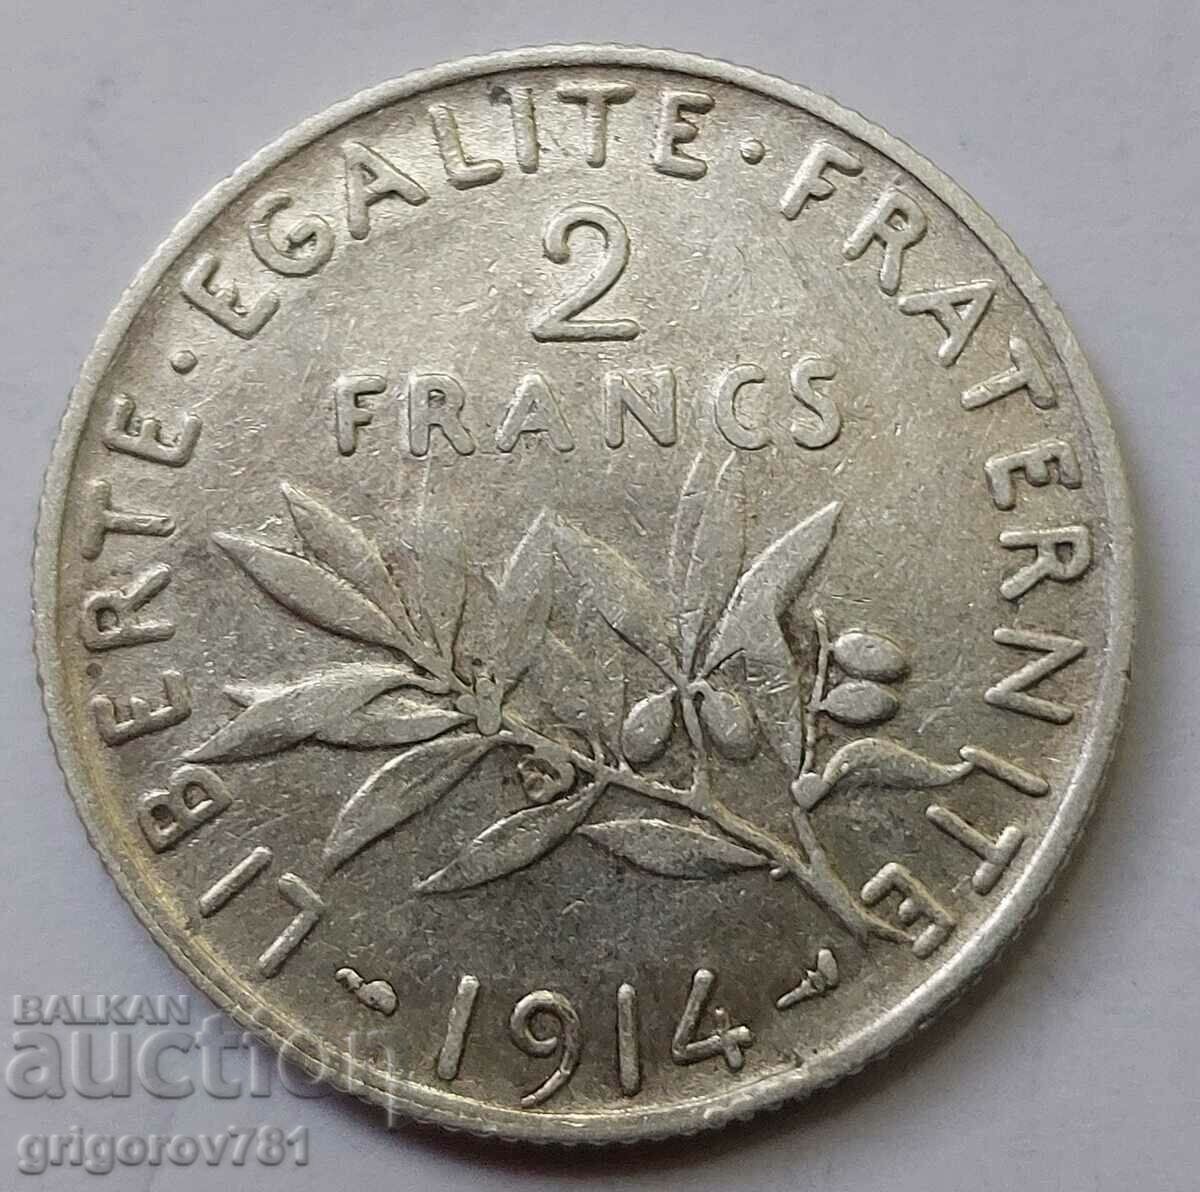 2 Francs Silver France 1914 - Silver Coin #111